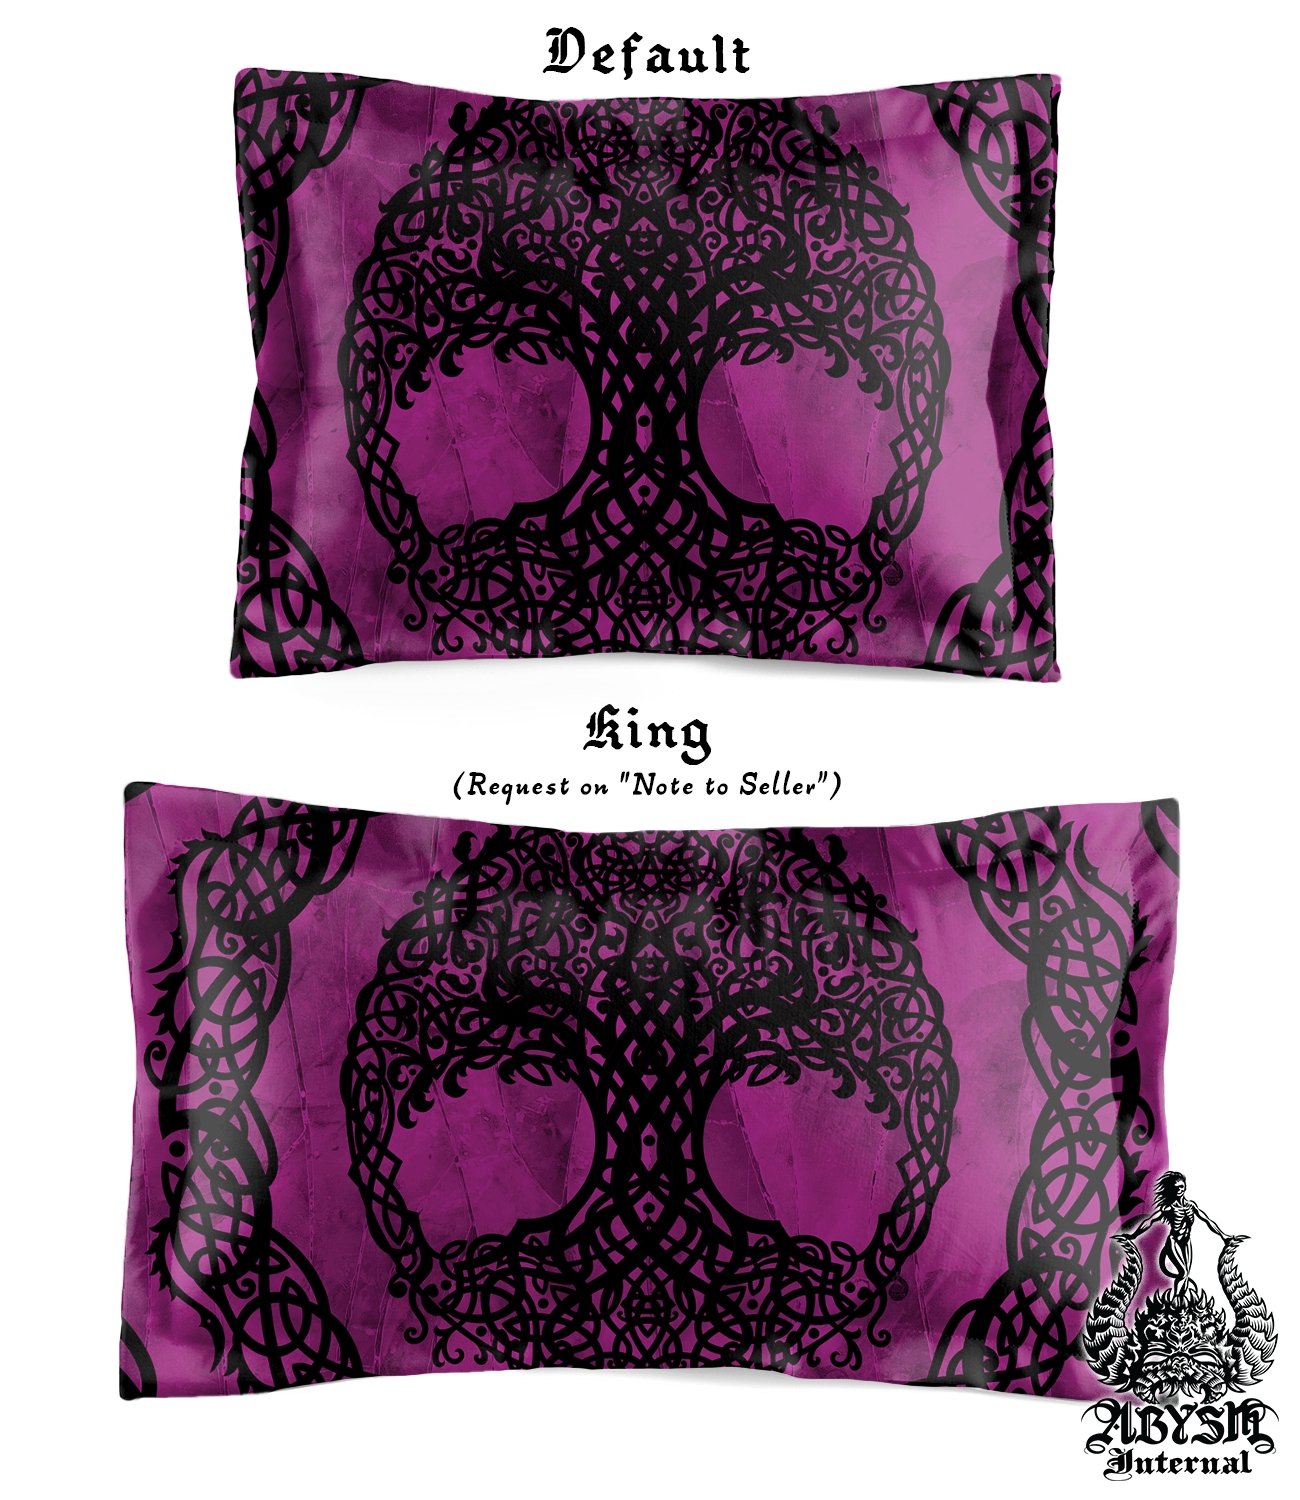 Witchy Bedding Set, Comforter and Duvet, Tree of Life Bed Cover, Witch Bedroom Decor King, Queen and Twin Size - Celtic, Wiccan Black and Pink - Abysm Internal